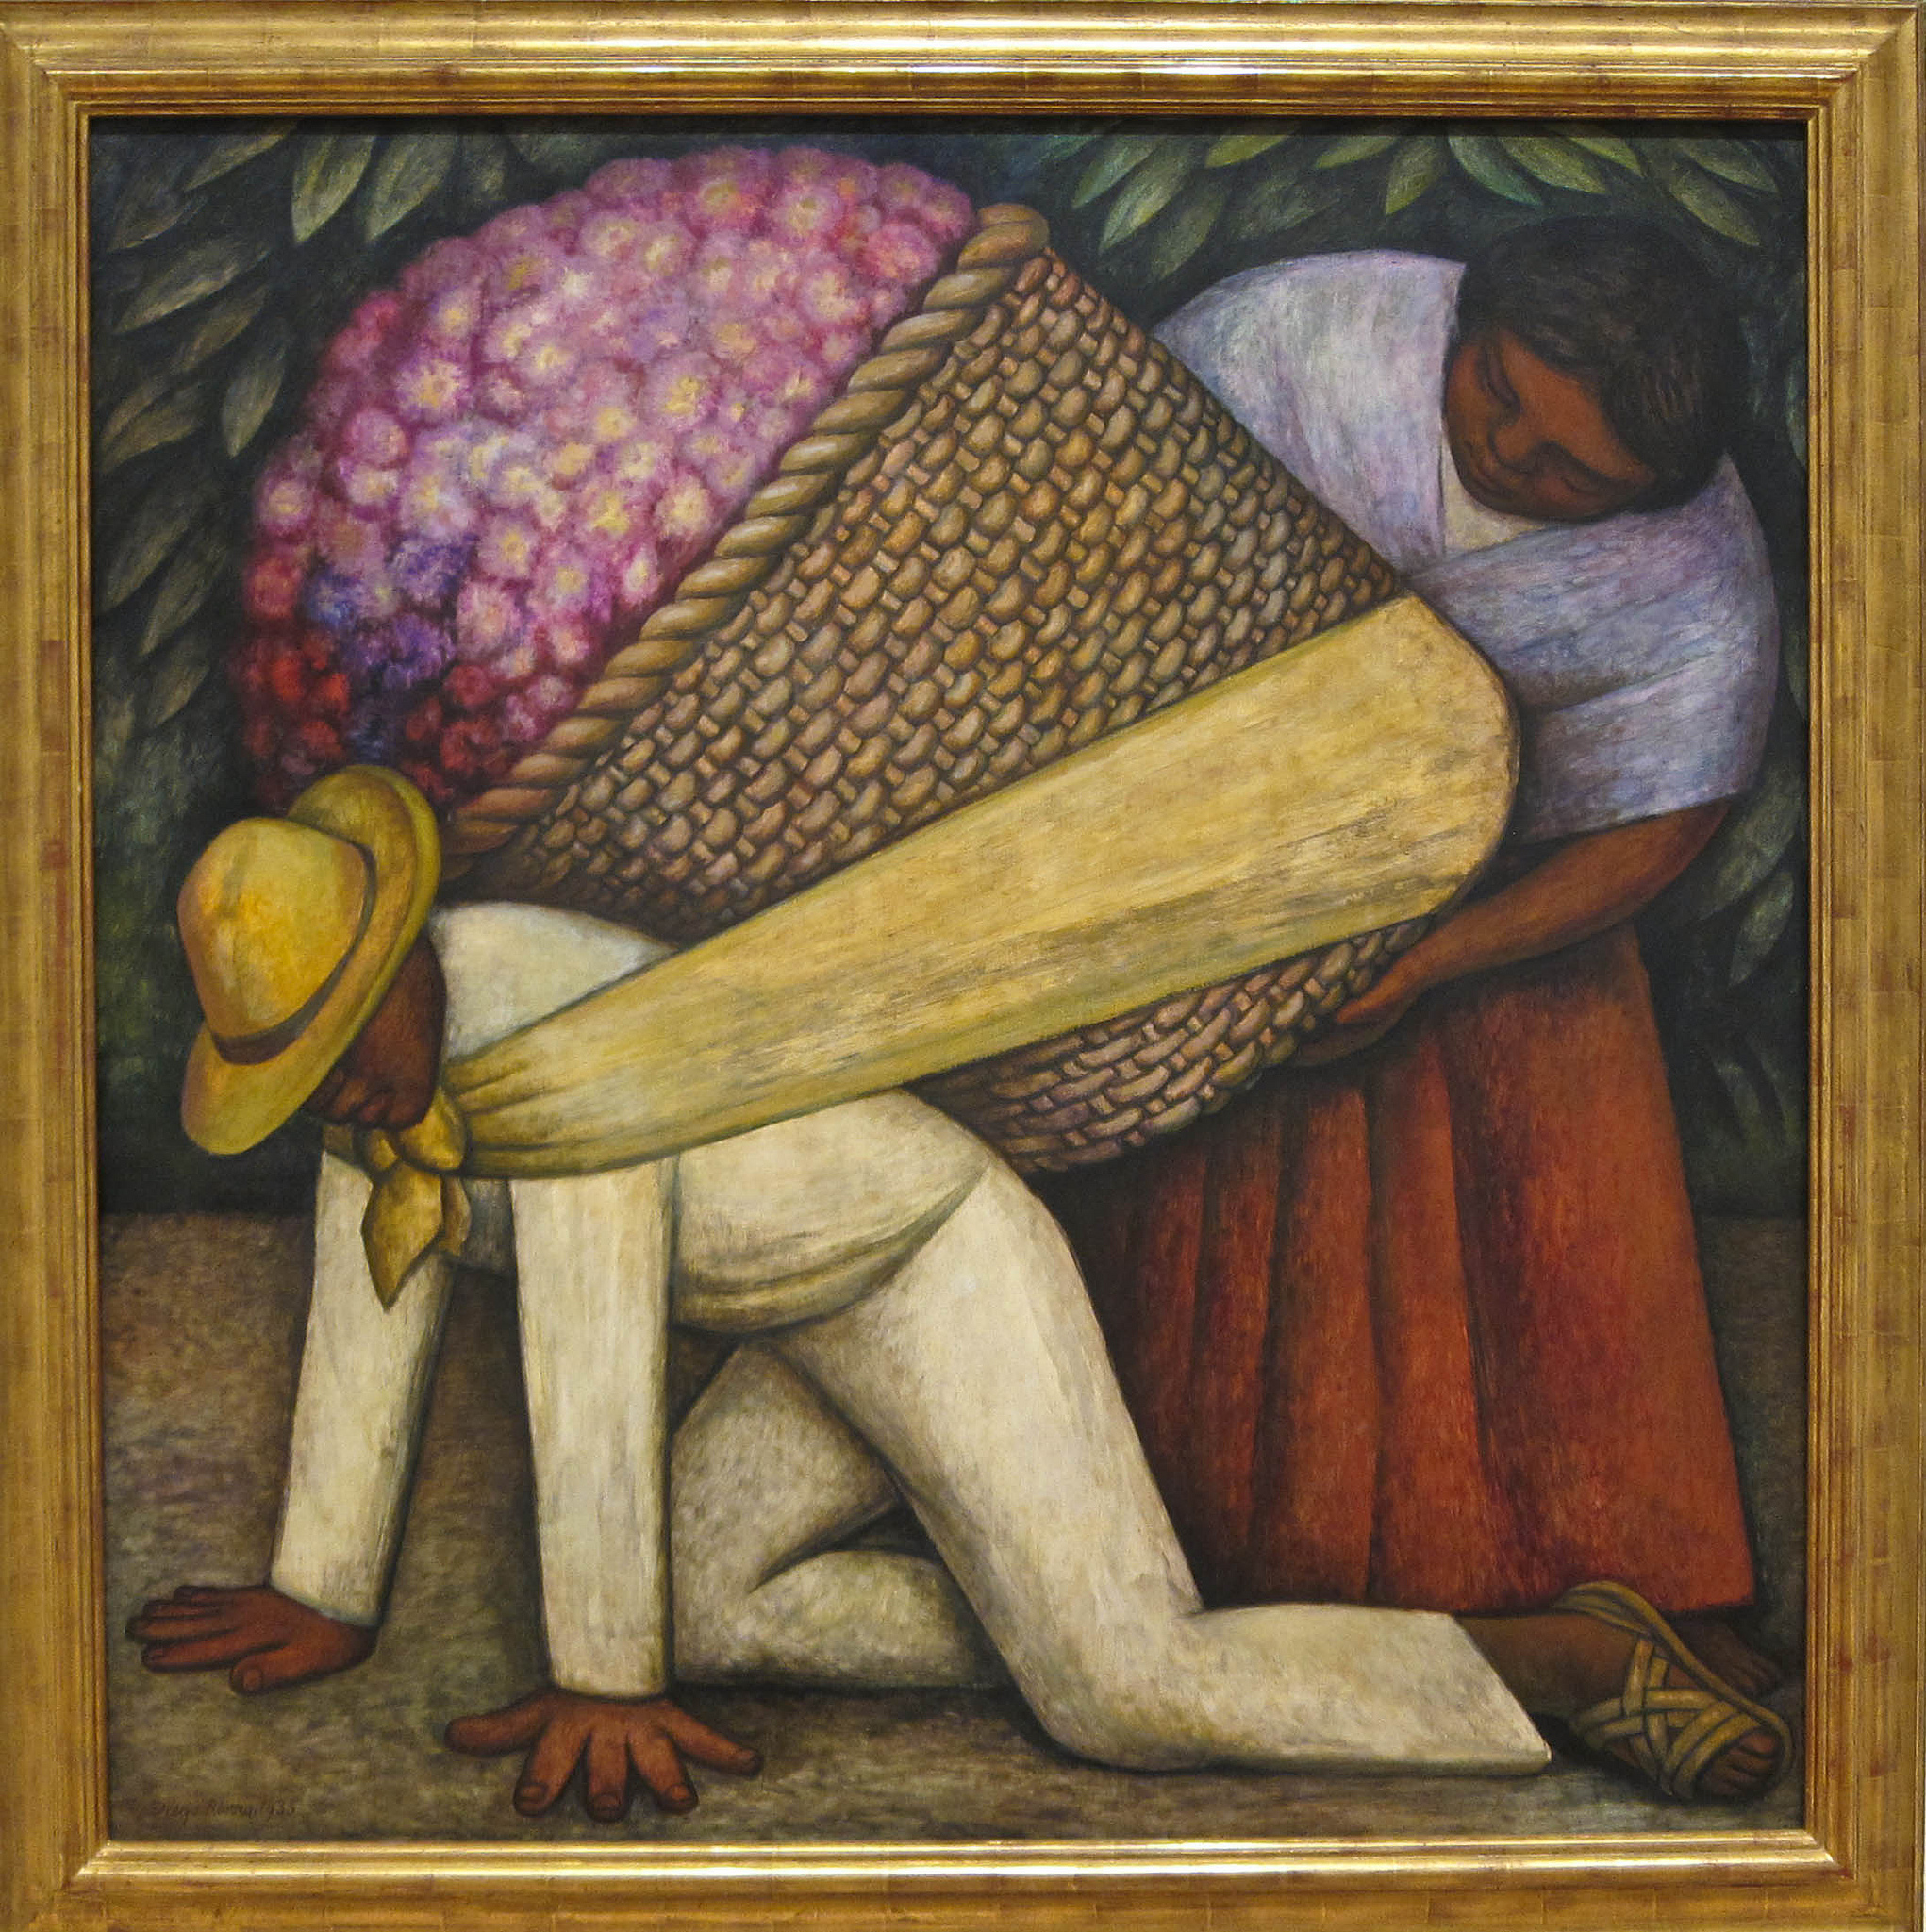 Diego Rivera's "The Flower Picker" depicts two hispanic flower-pickers. One is crawling on the ground with a huge basket of picked flowers tied to his back around his shoulders. the other worker is a woman, standing and holding the basket up on his back.